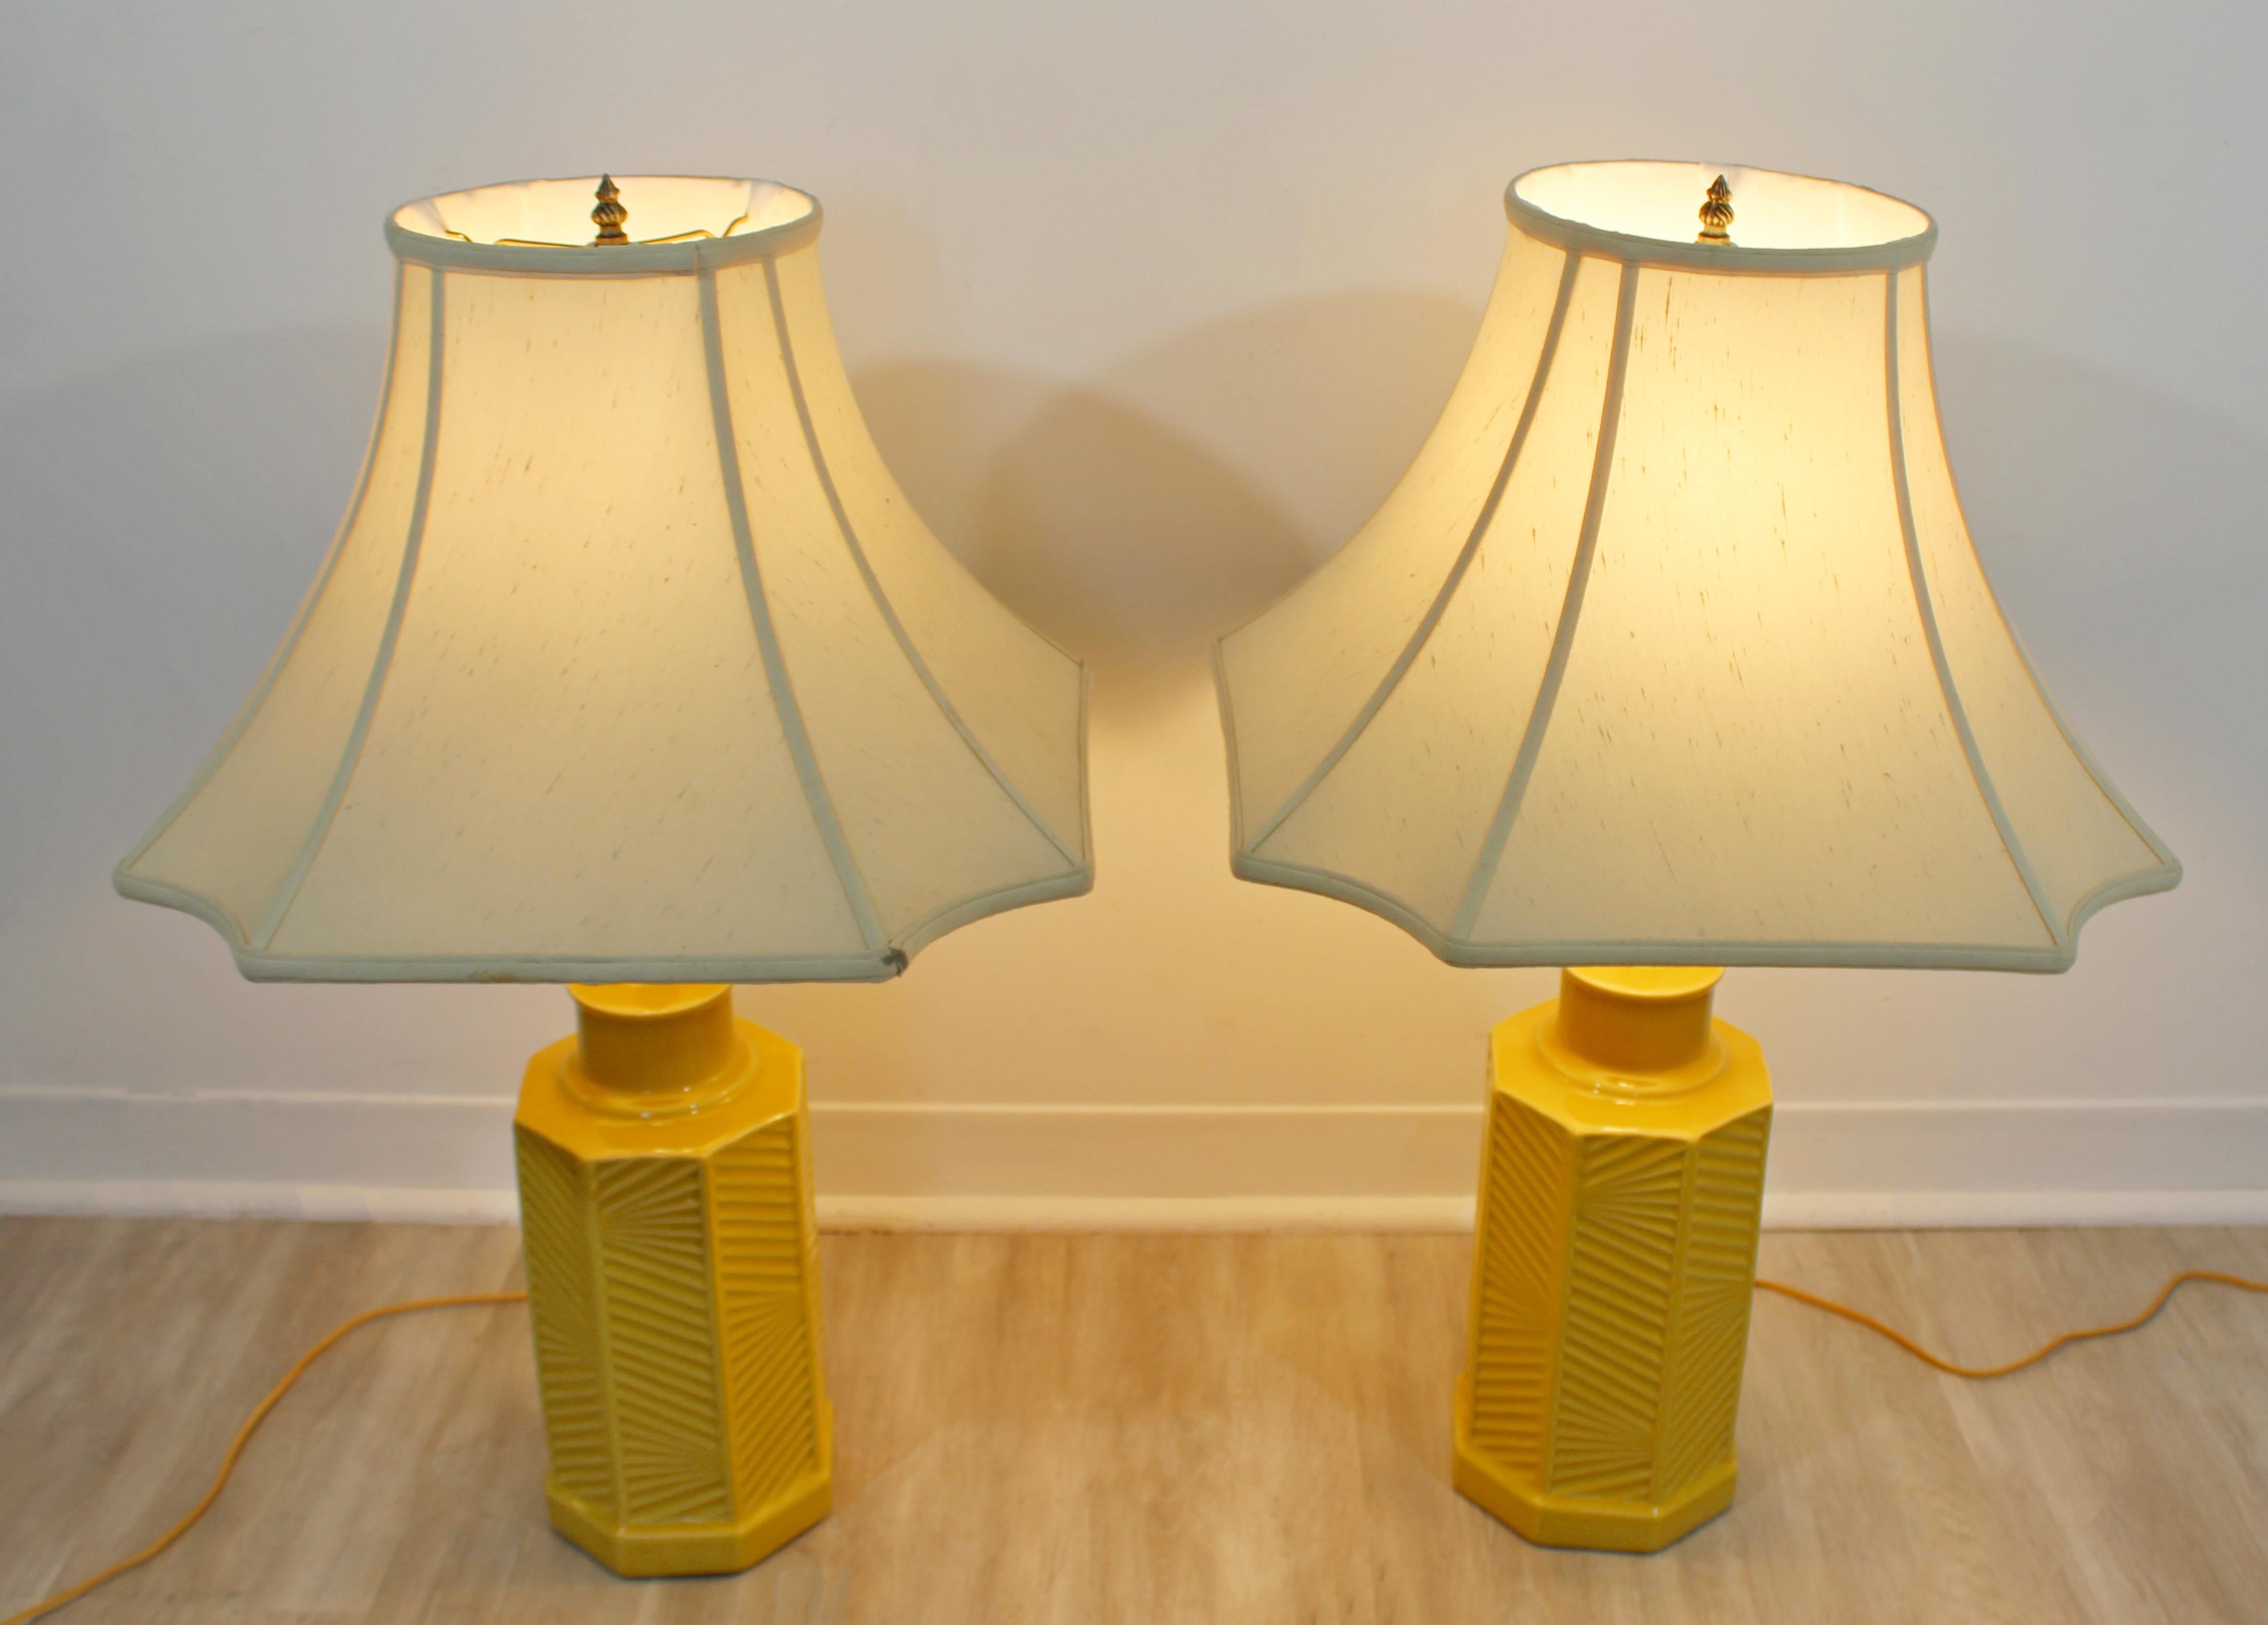 For your consideration is a fabulous pair of chinoiserie style, yellow ceramic table lamps, with Asian shades, circa 1970s. In excellent vintage condition. The dimensions of the shades are 18